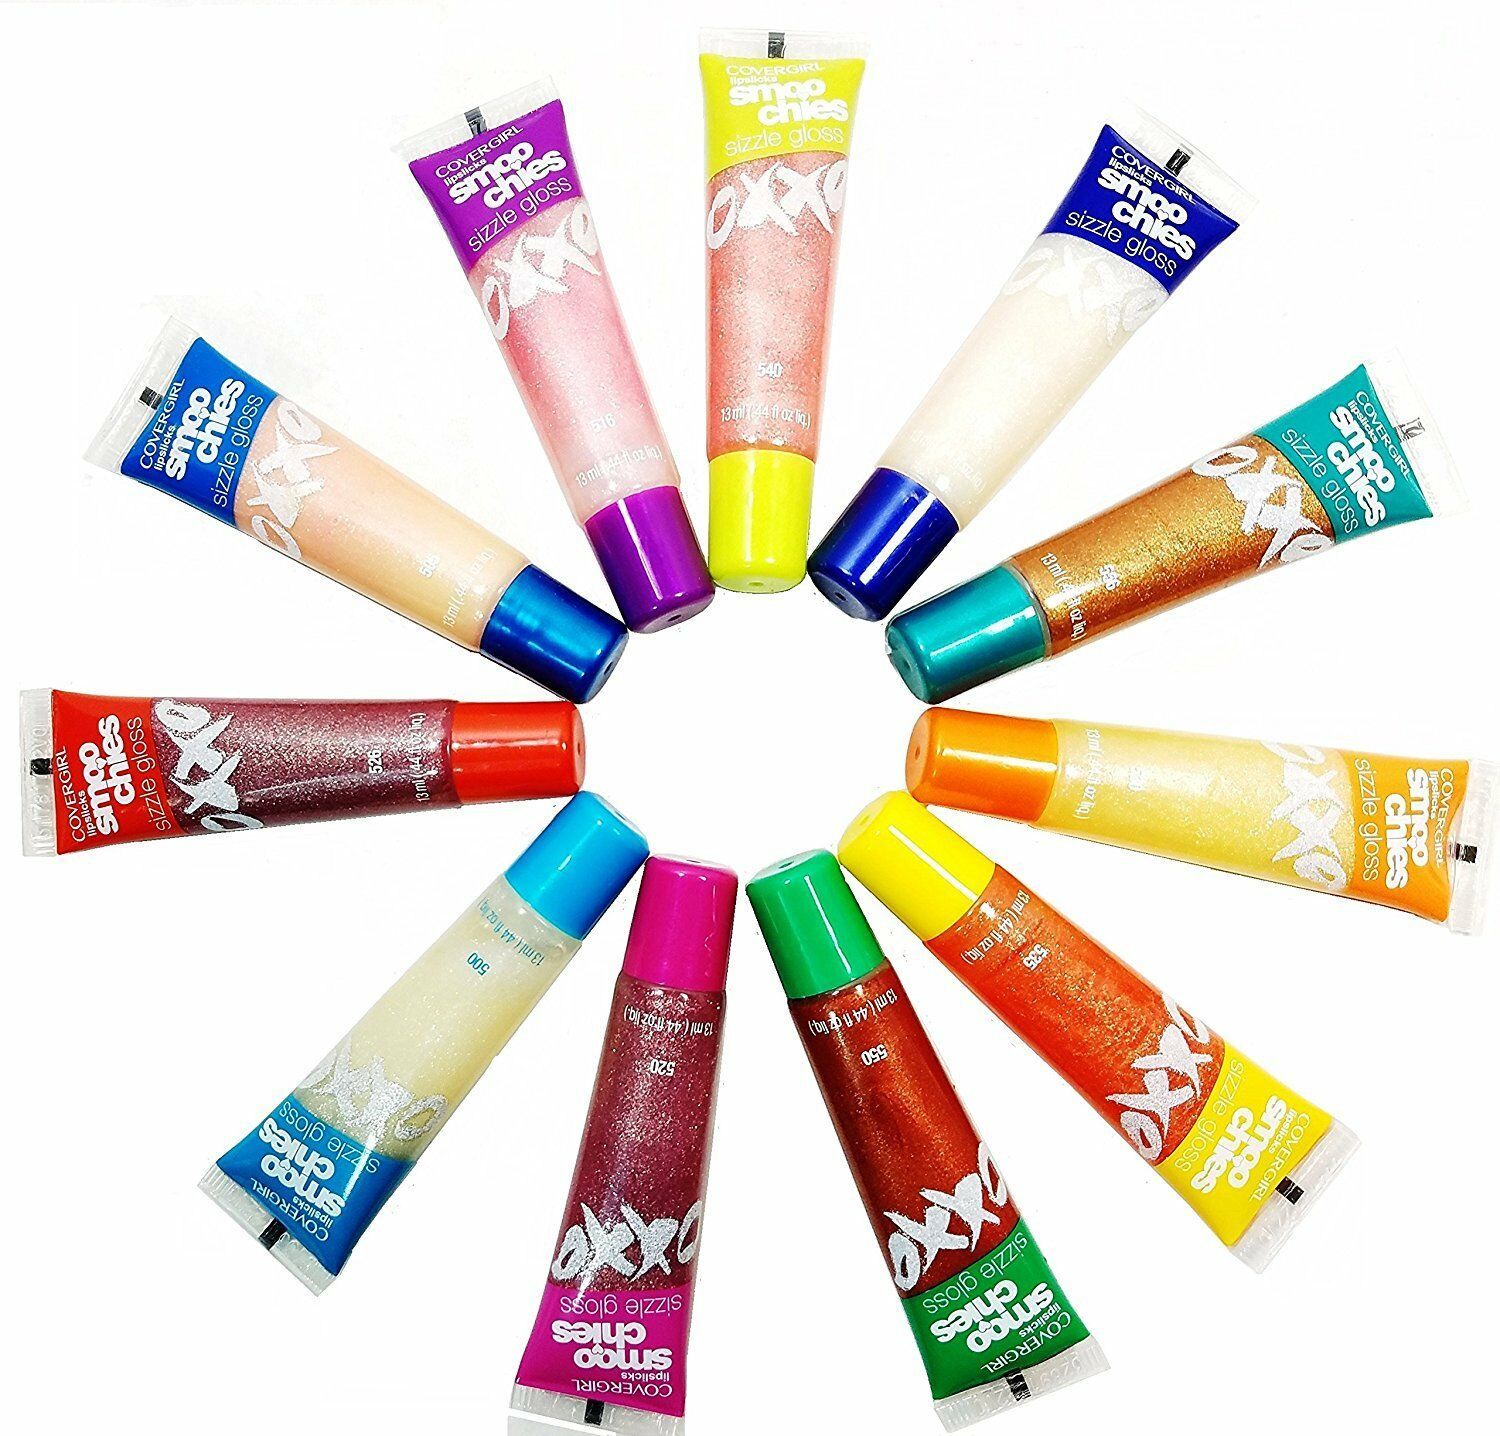 Primary image for Buy 2 Get 1 Free (Add 3 To Cart) CoverGirl Lipslicks Smoochies Sizzle Lip Gloss